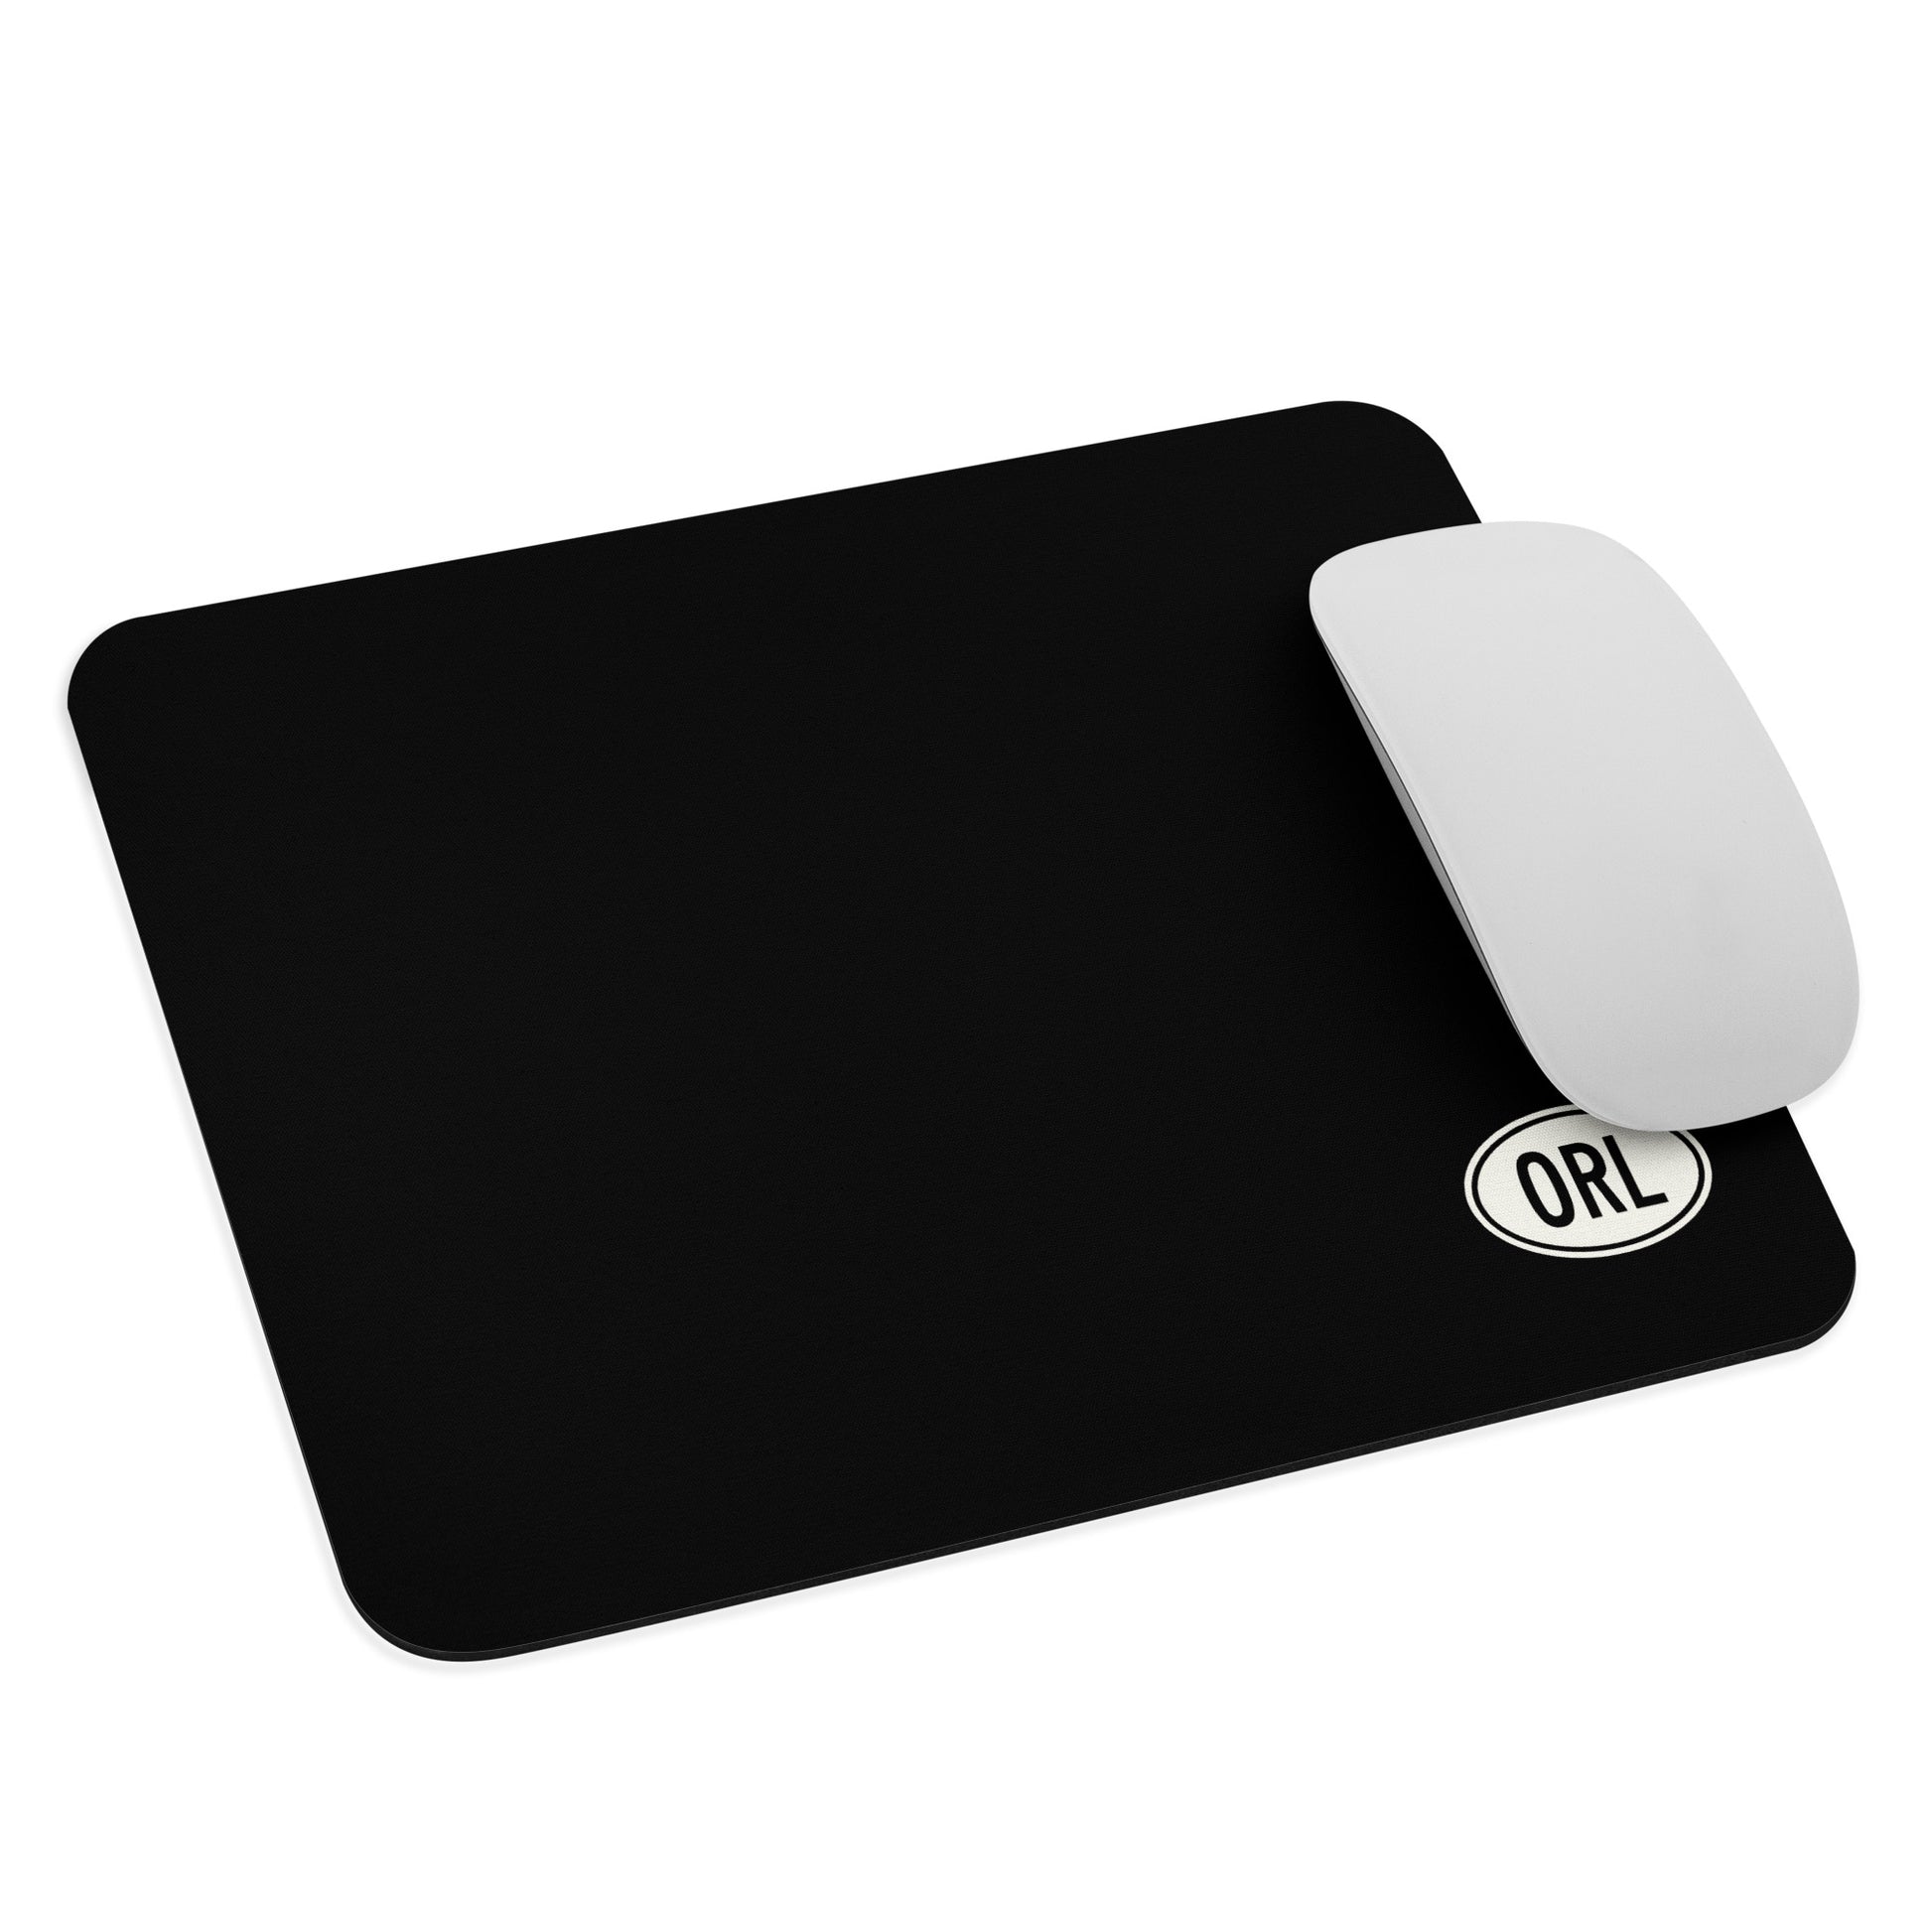 Unique Travel Gift Mouse Pad - White Oval • ORL Orlando • YHM Designs - Image 03